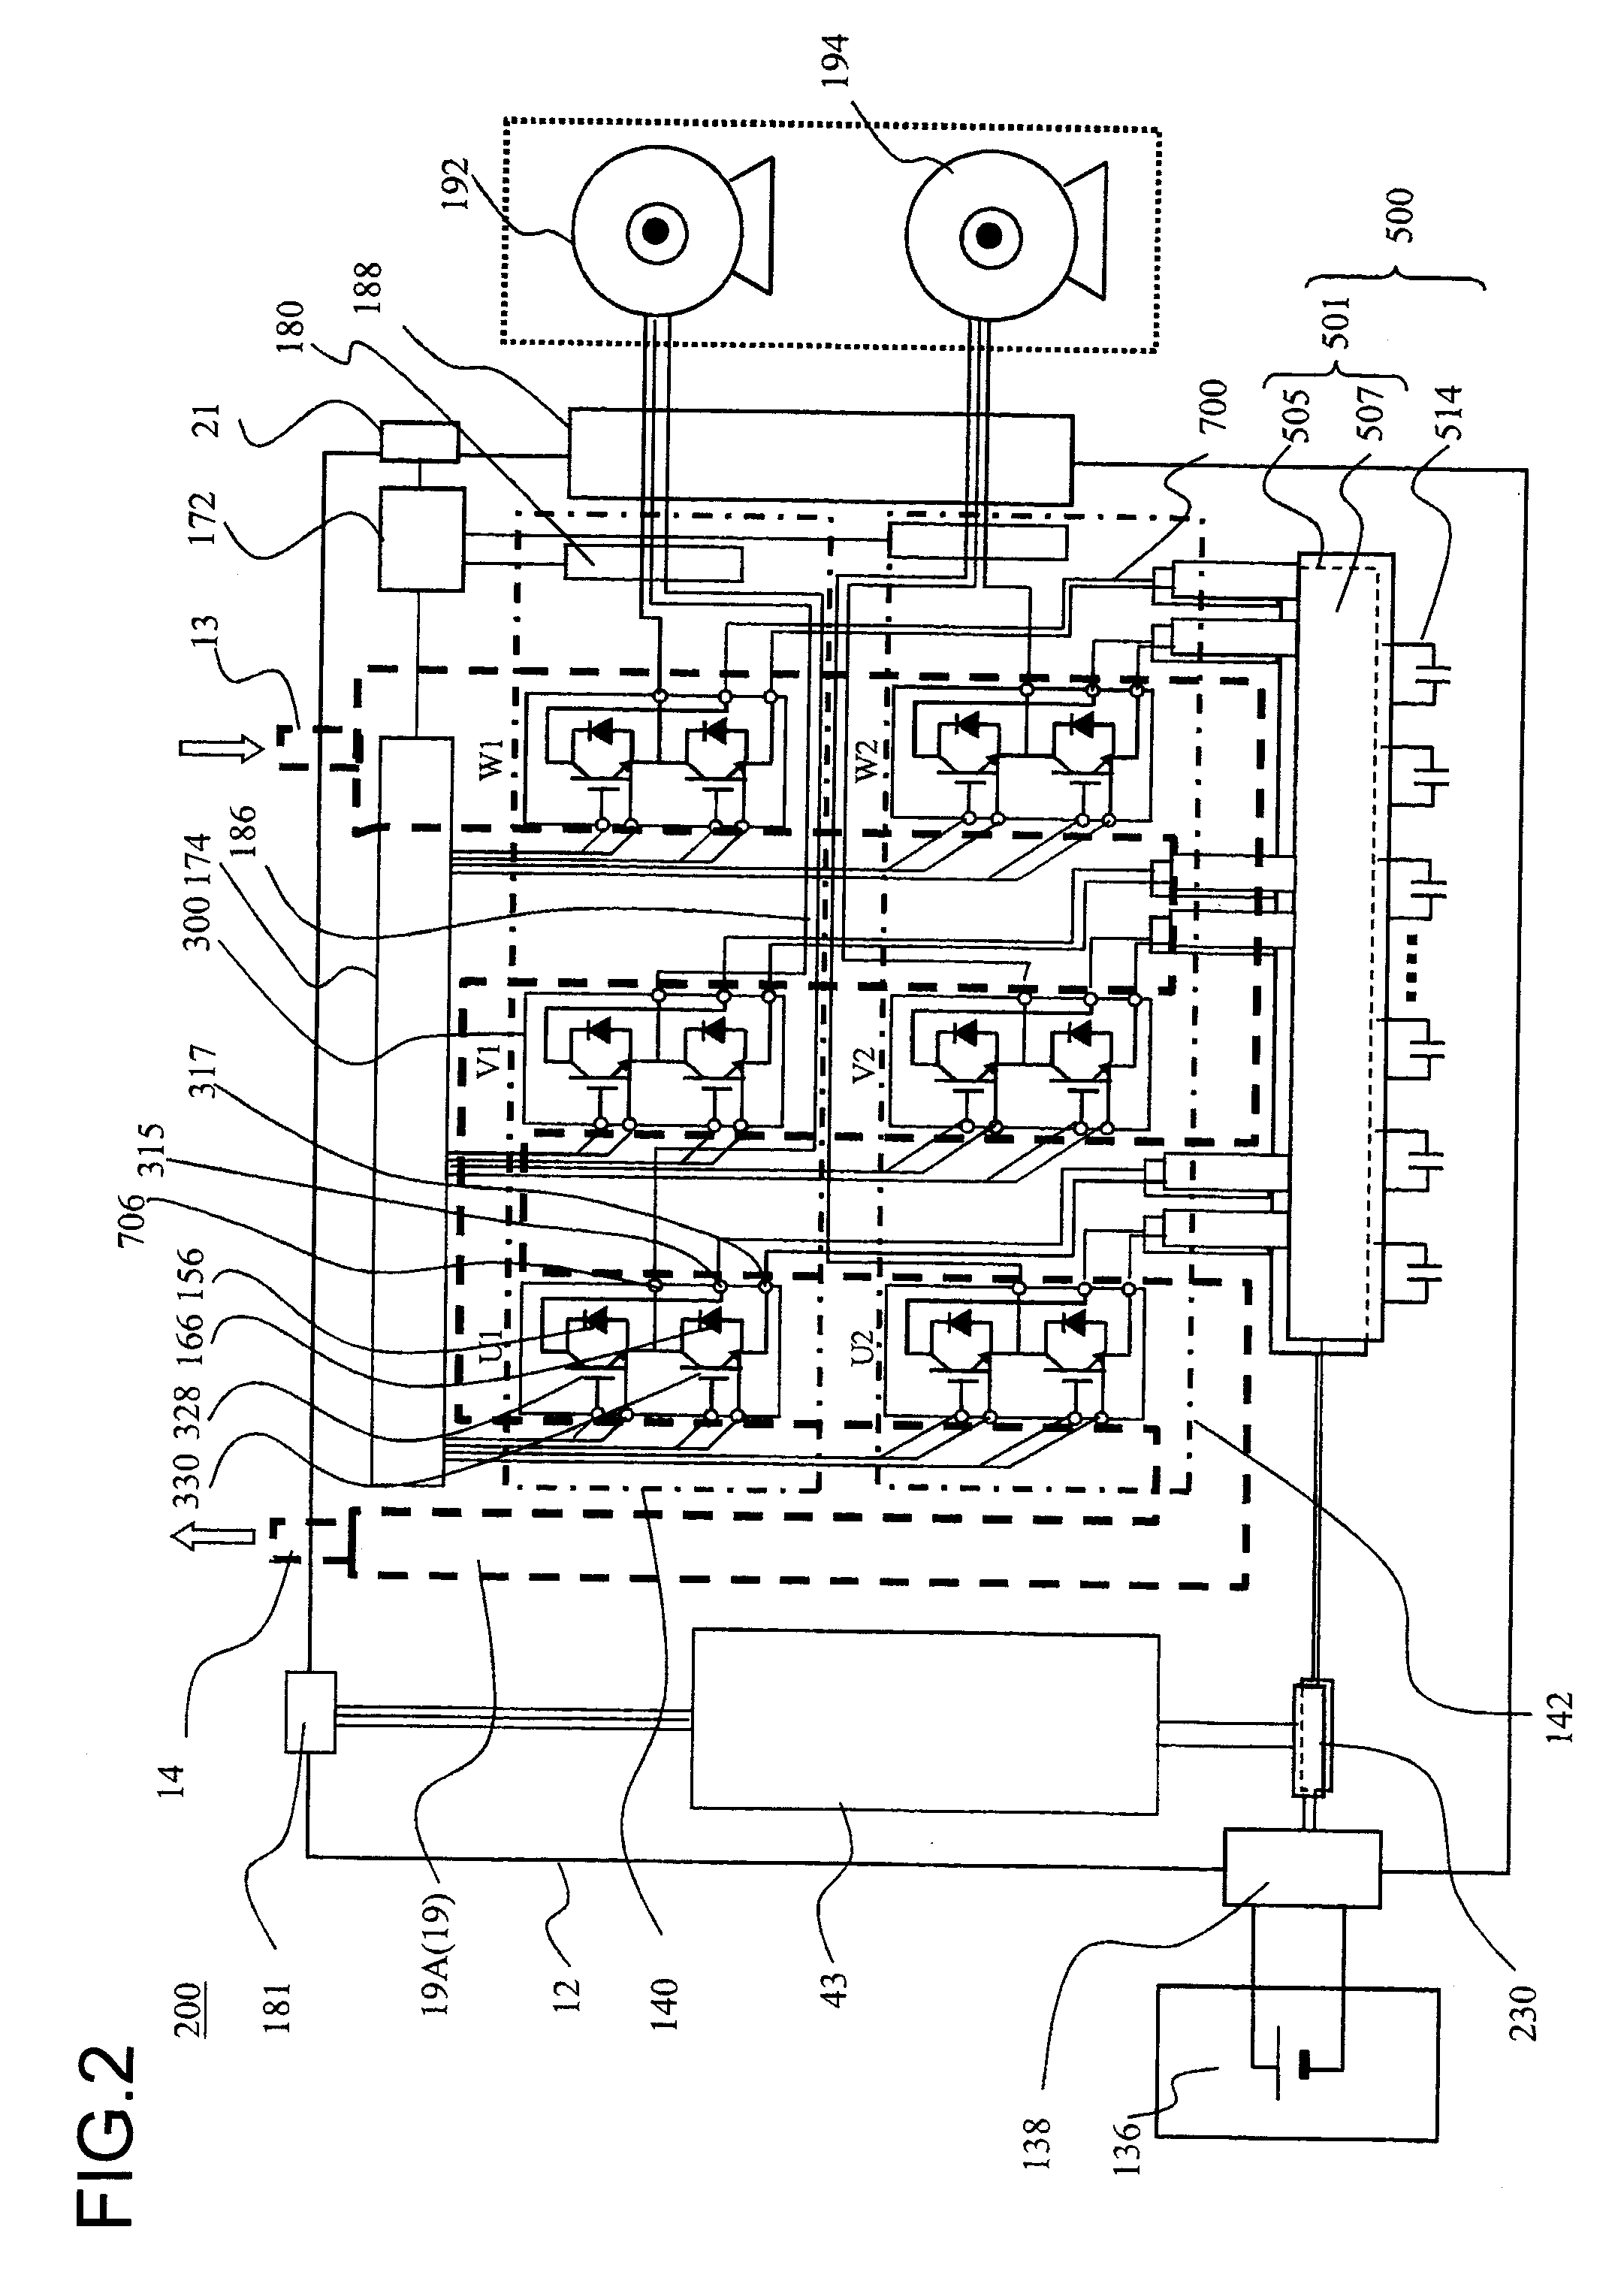 Power Module and Power Conversion Device